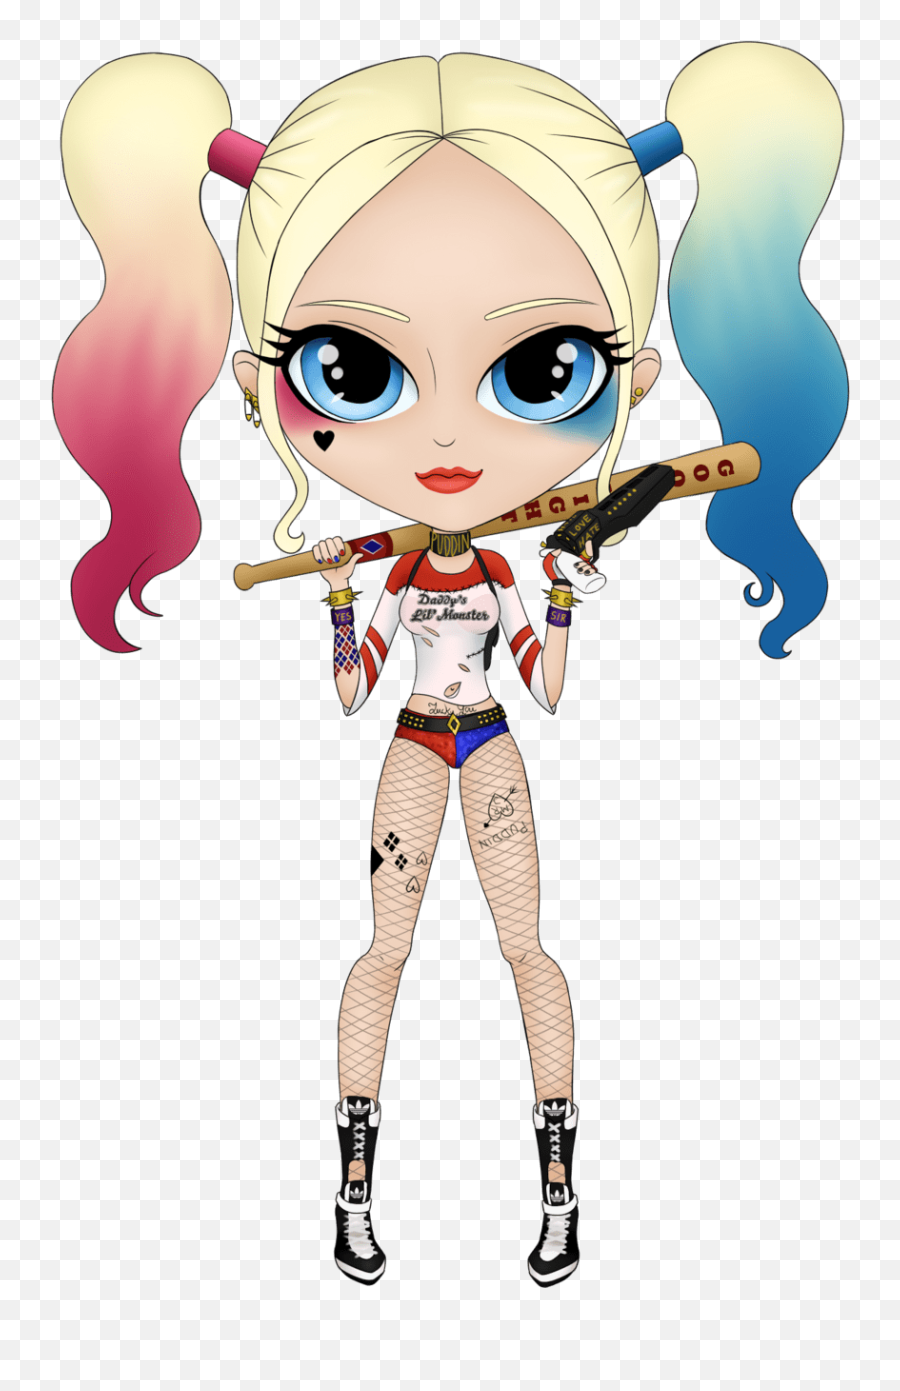 Good Smile Suicide Squad Harley Quinn - Anime Harley Quinn Drawing Easy Emoji,Harley Quinn Emoji